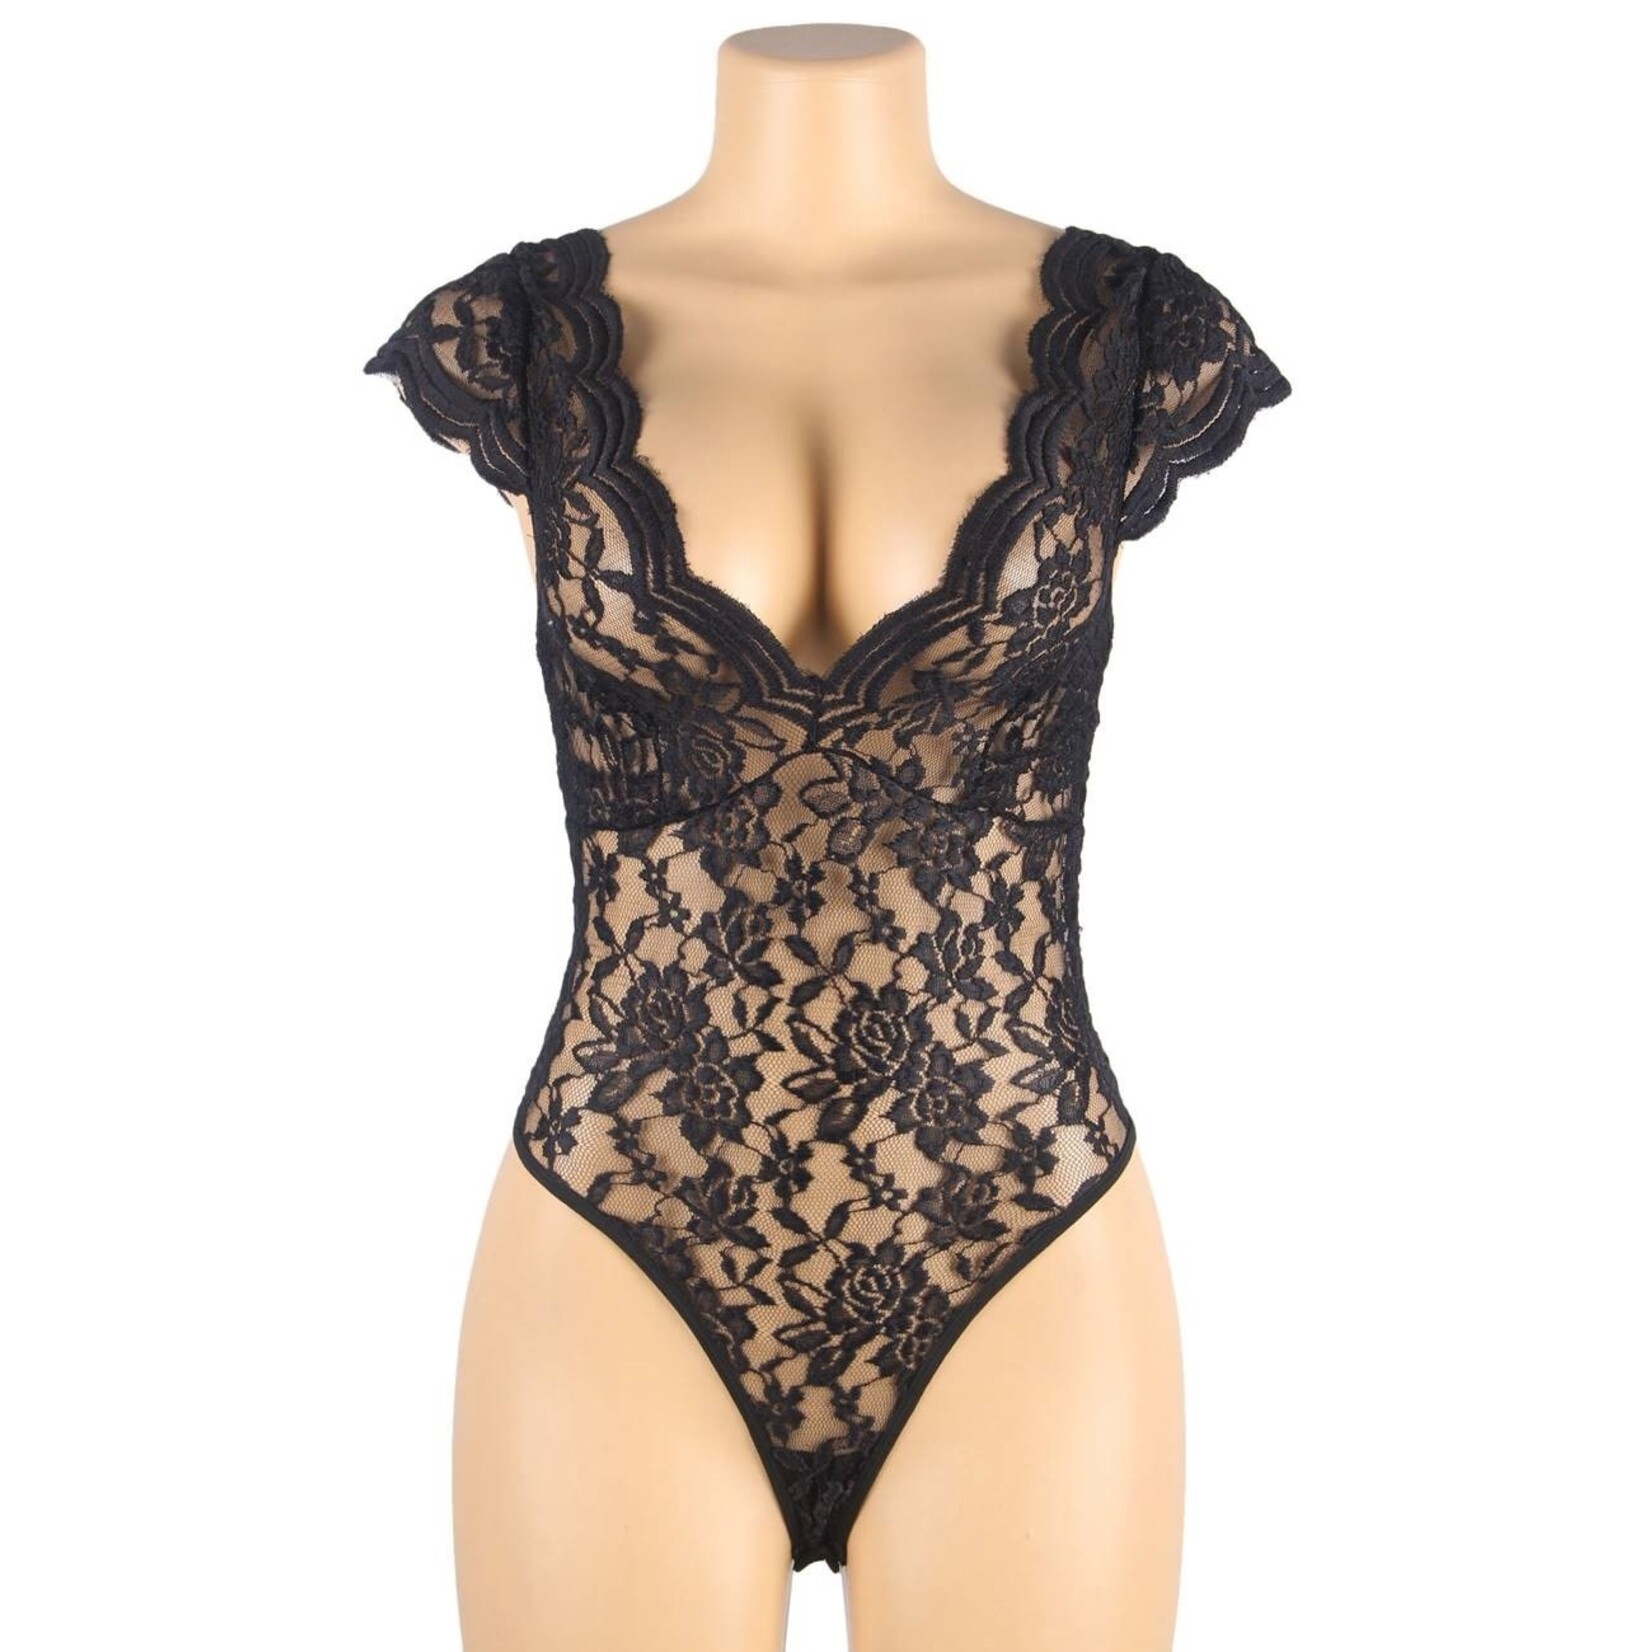 OH YEAH! -  SEXY BLACK DEEP V BACKLESS FULL LACE TEDDY M-L